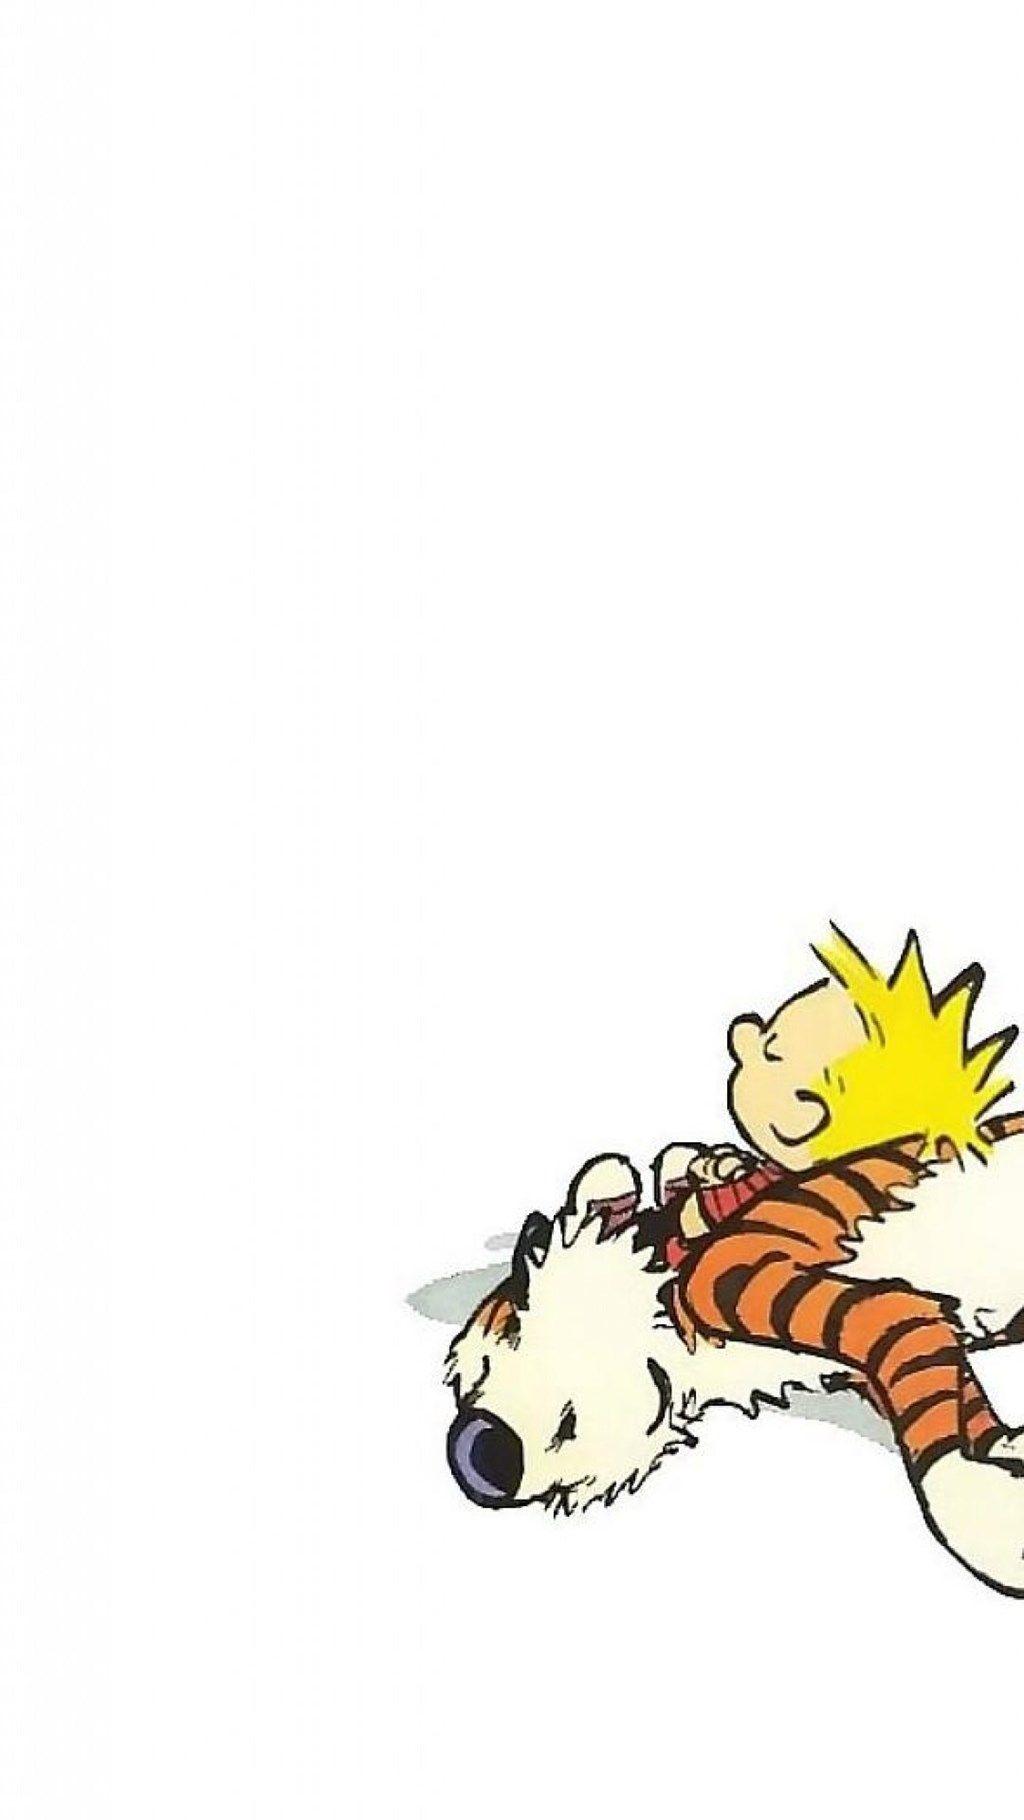 Calvin and Hobbes iPhone Wallpapers